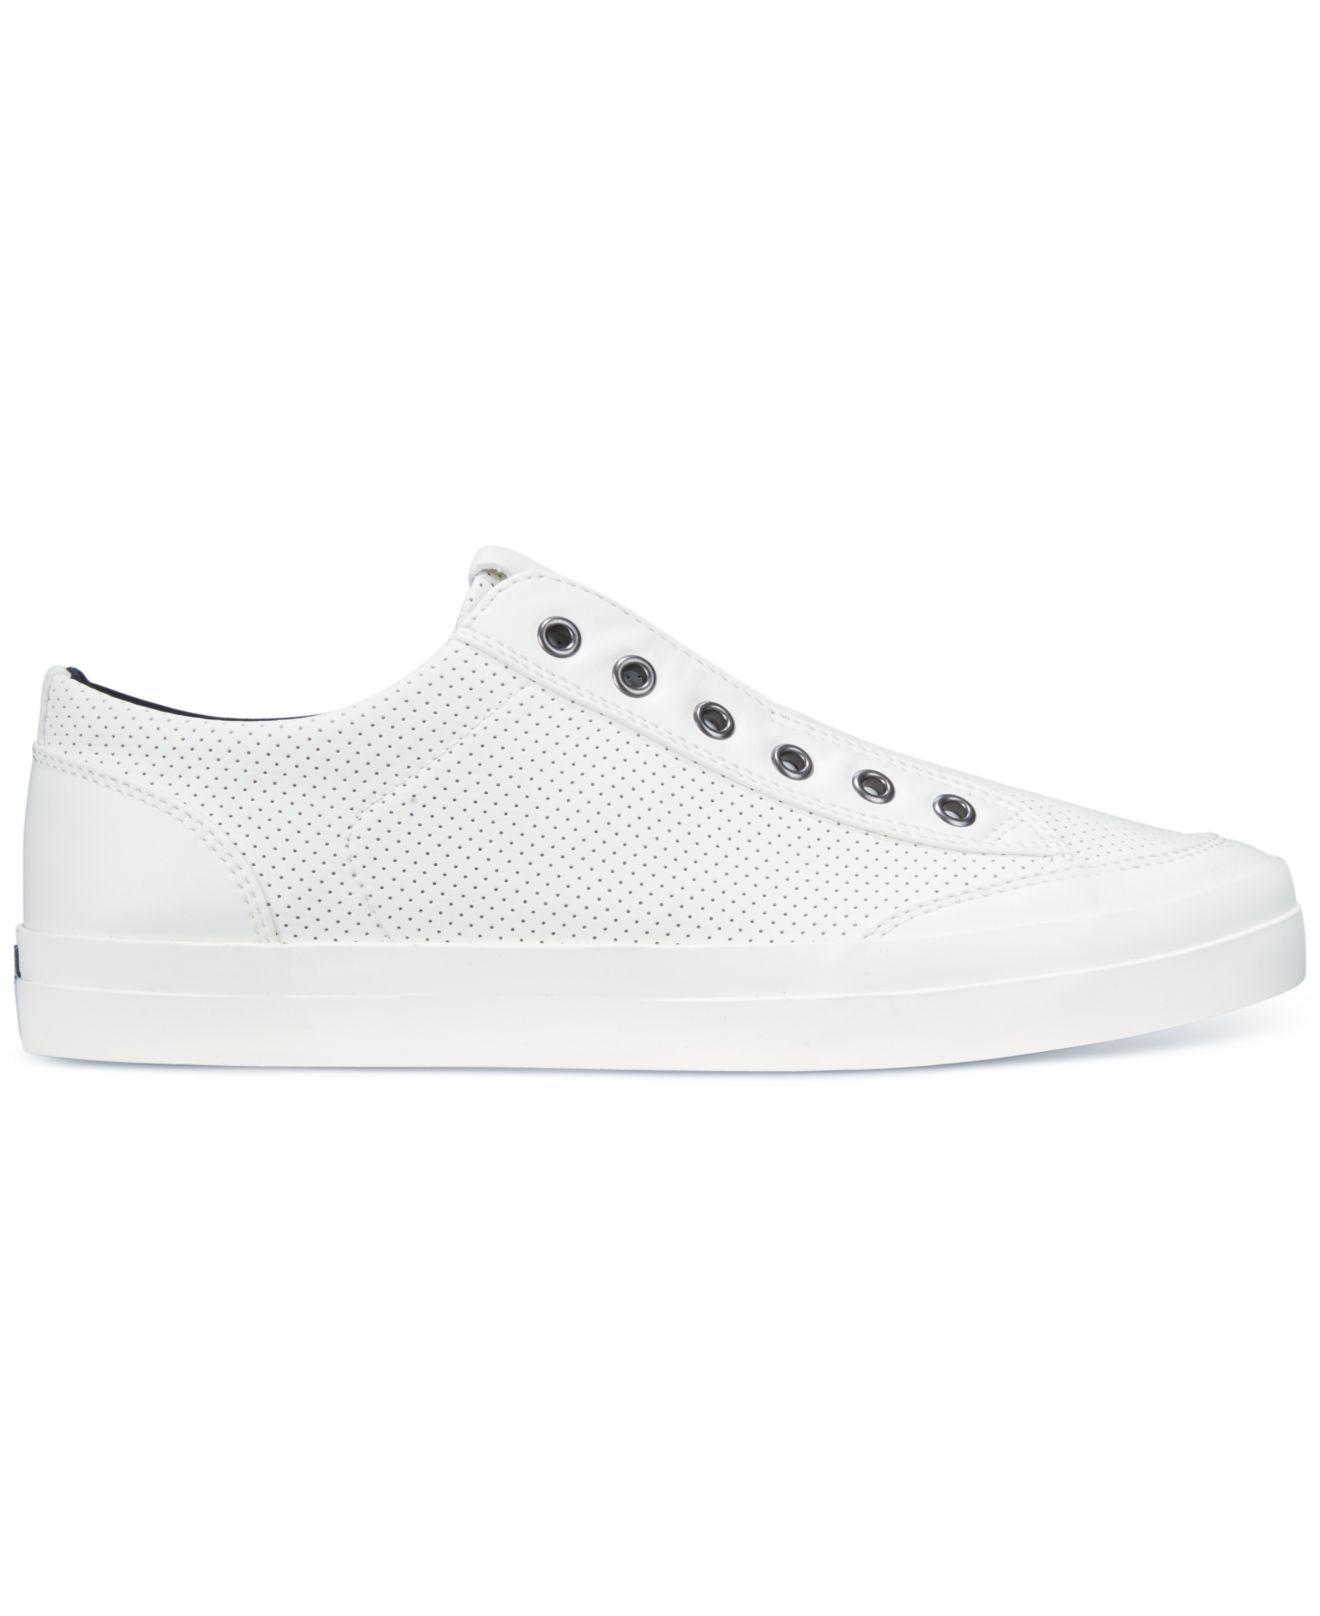 Guess Men's Mitt Perforated Slip-on Sneakers in White for Men - Lyst